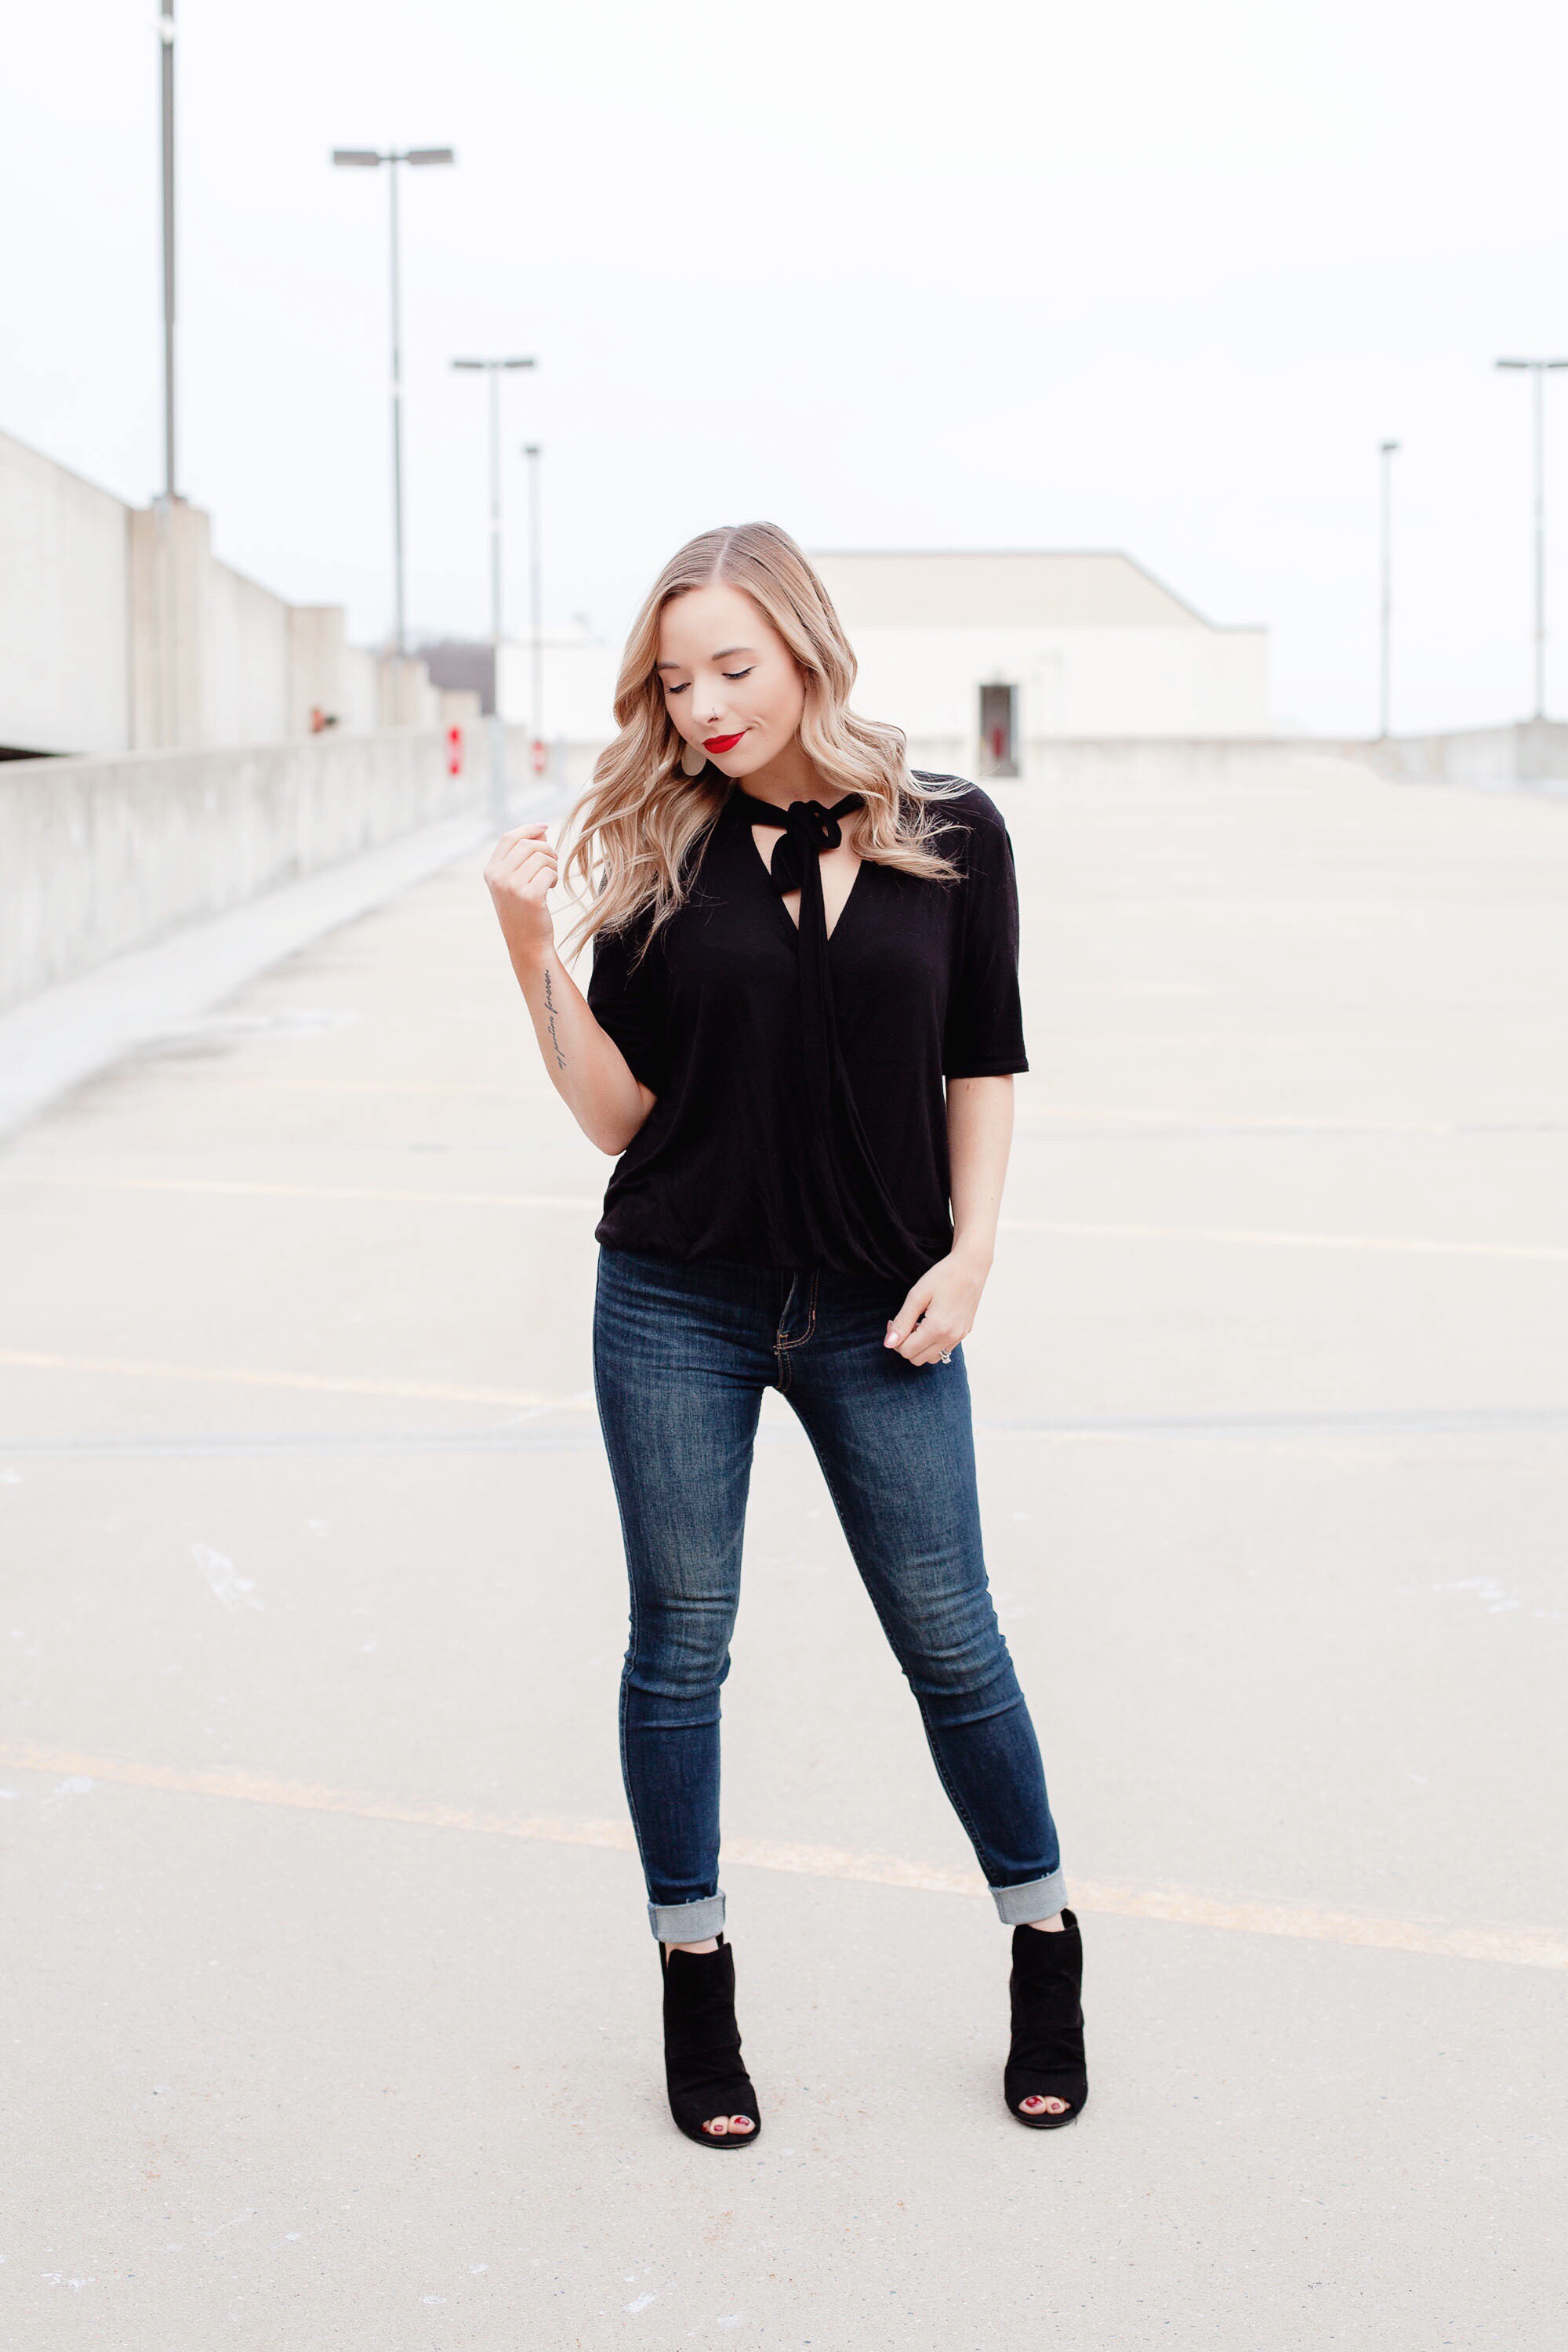 jeans and black top outfit